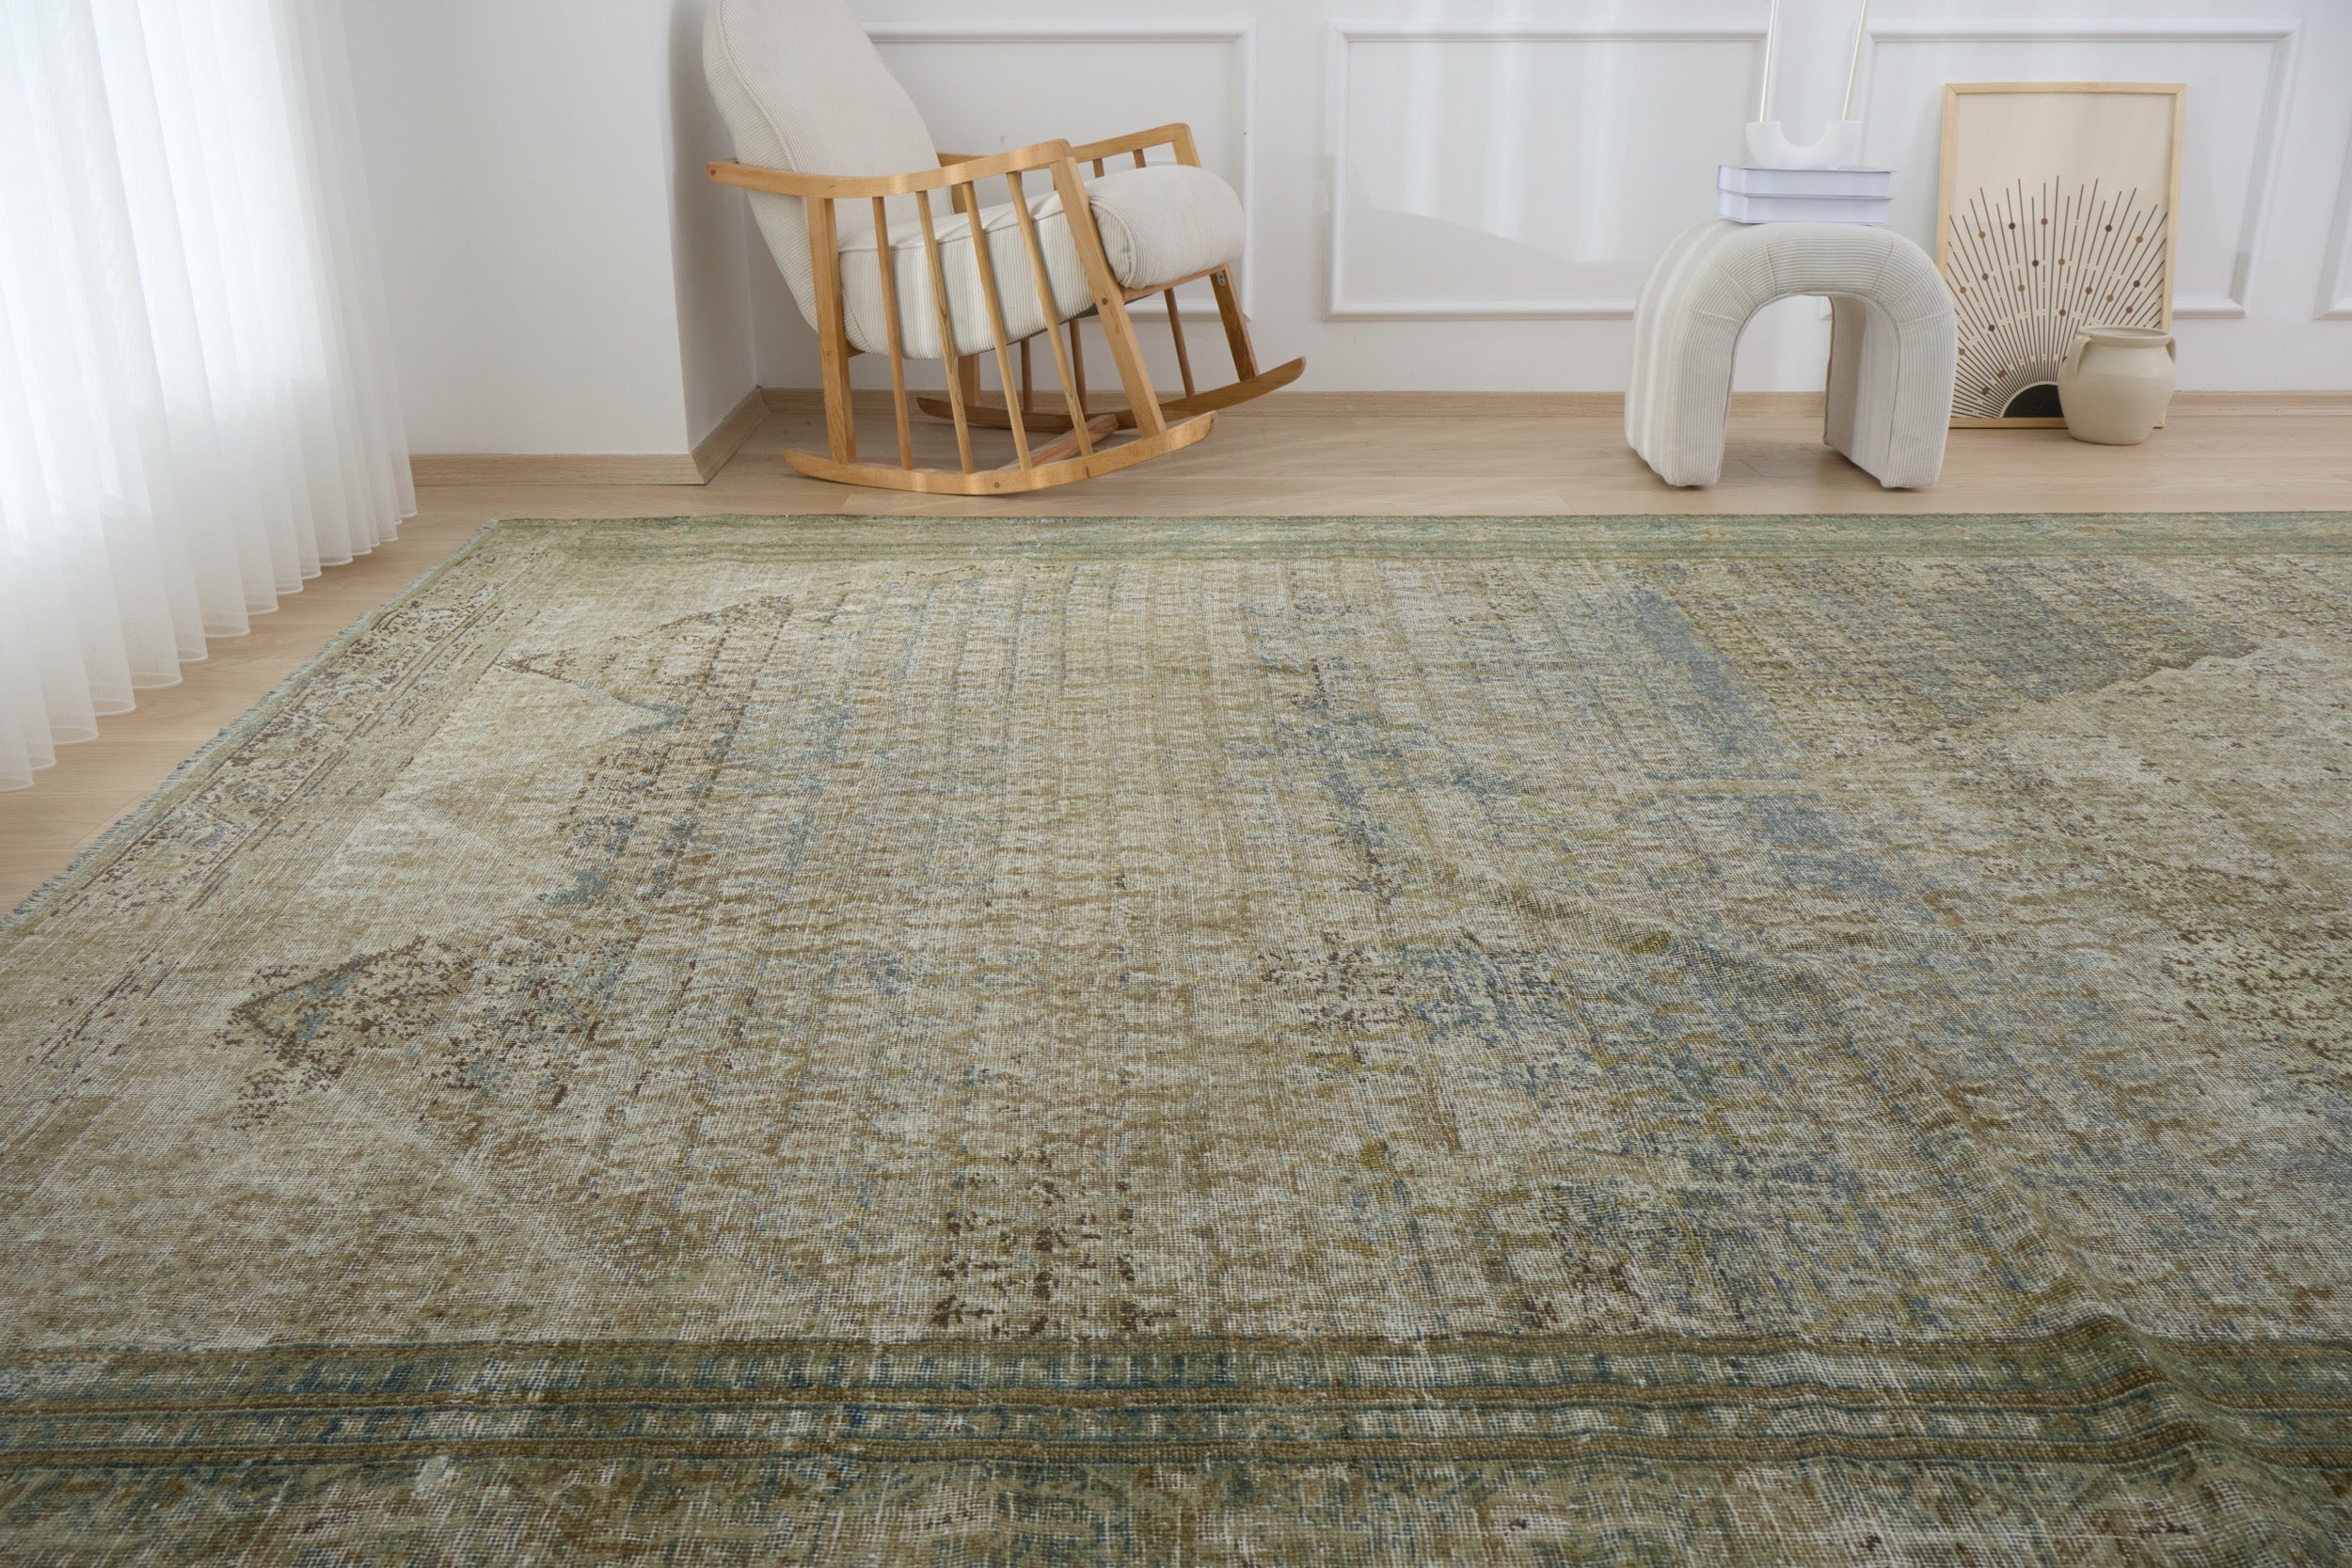 Nyah | From Malayer with Mastery, A Rug That Speaks | Kuden Rugs